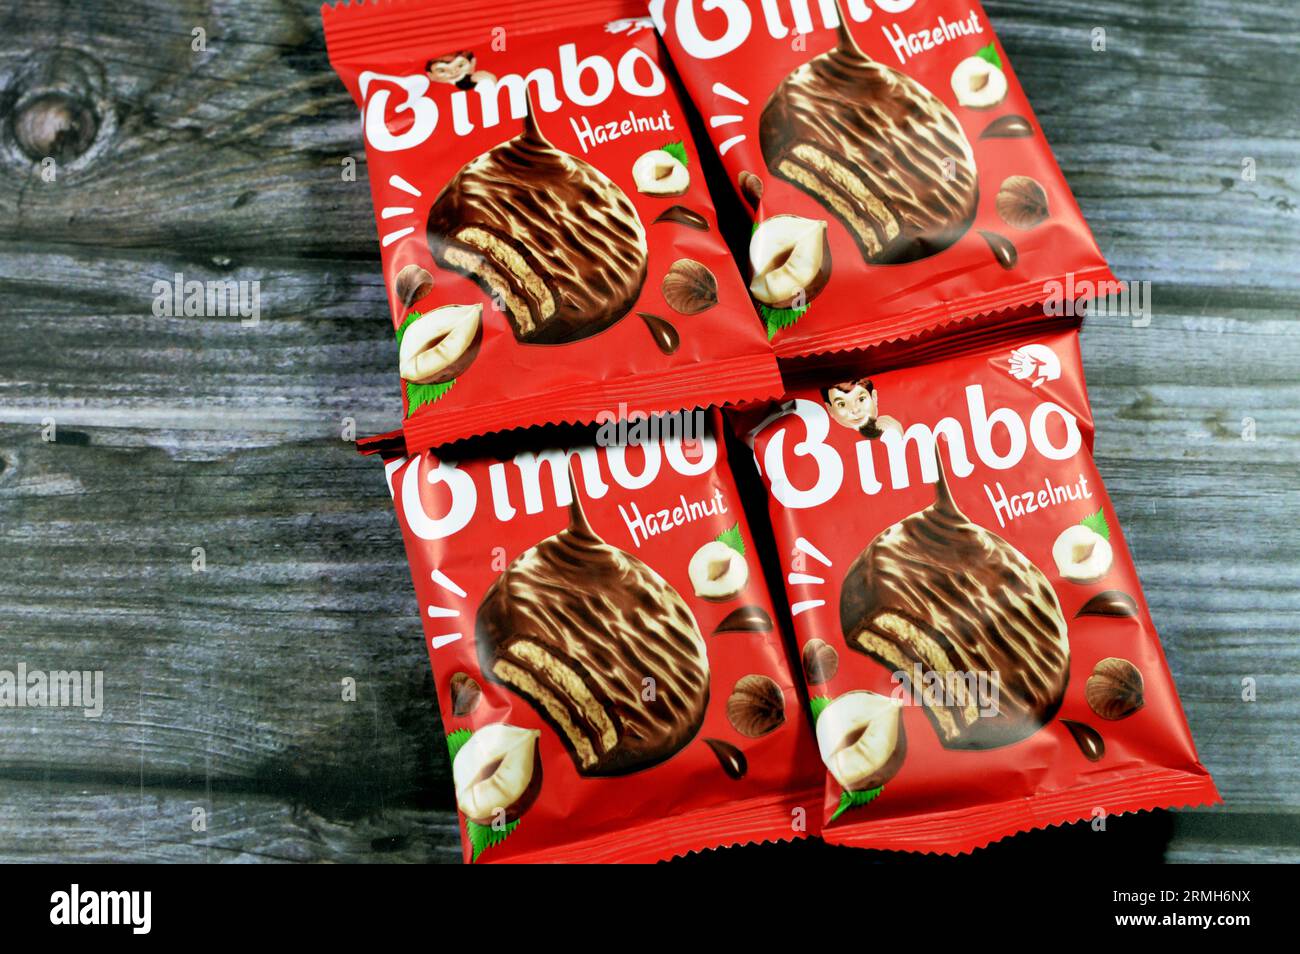 Cairo, Egypt, August 21 2023: Bimbo hazelnut with chocolate cream biscuit,  Tasty and delicious biscuits that come with creamy choco filling. Made with  Stock Photo - Alamy